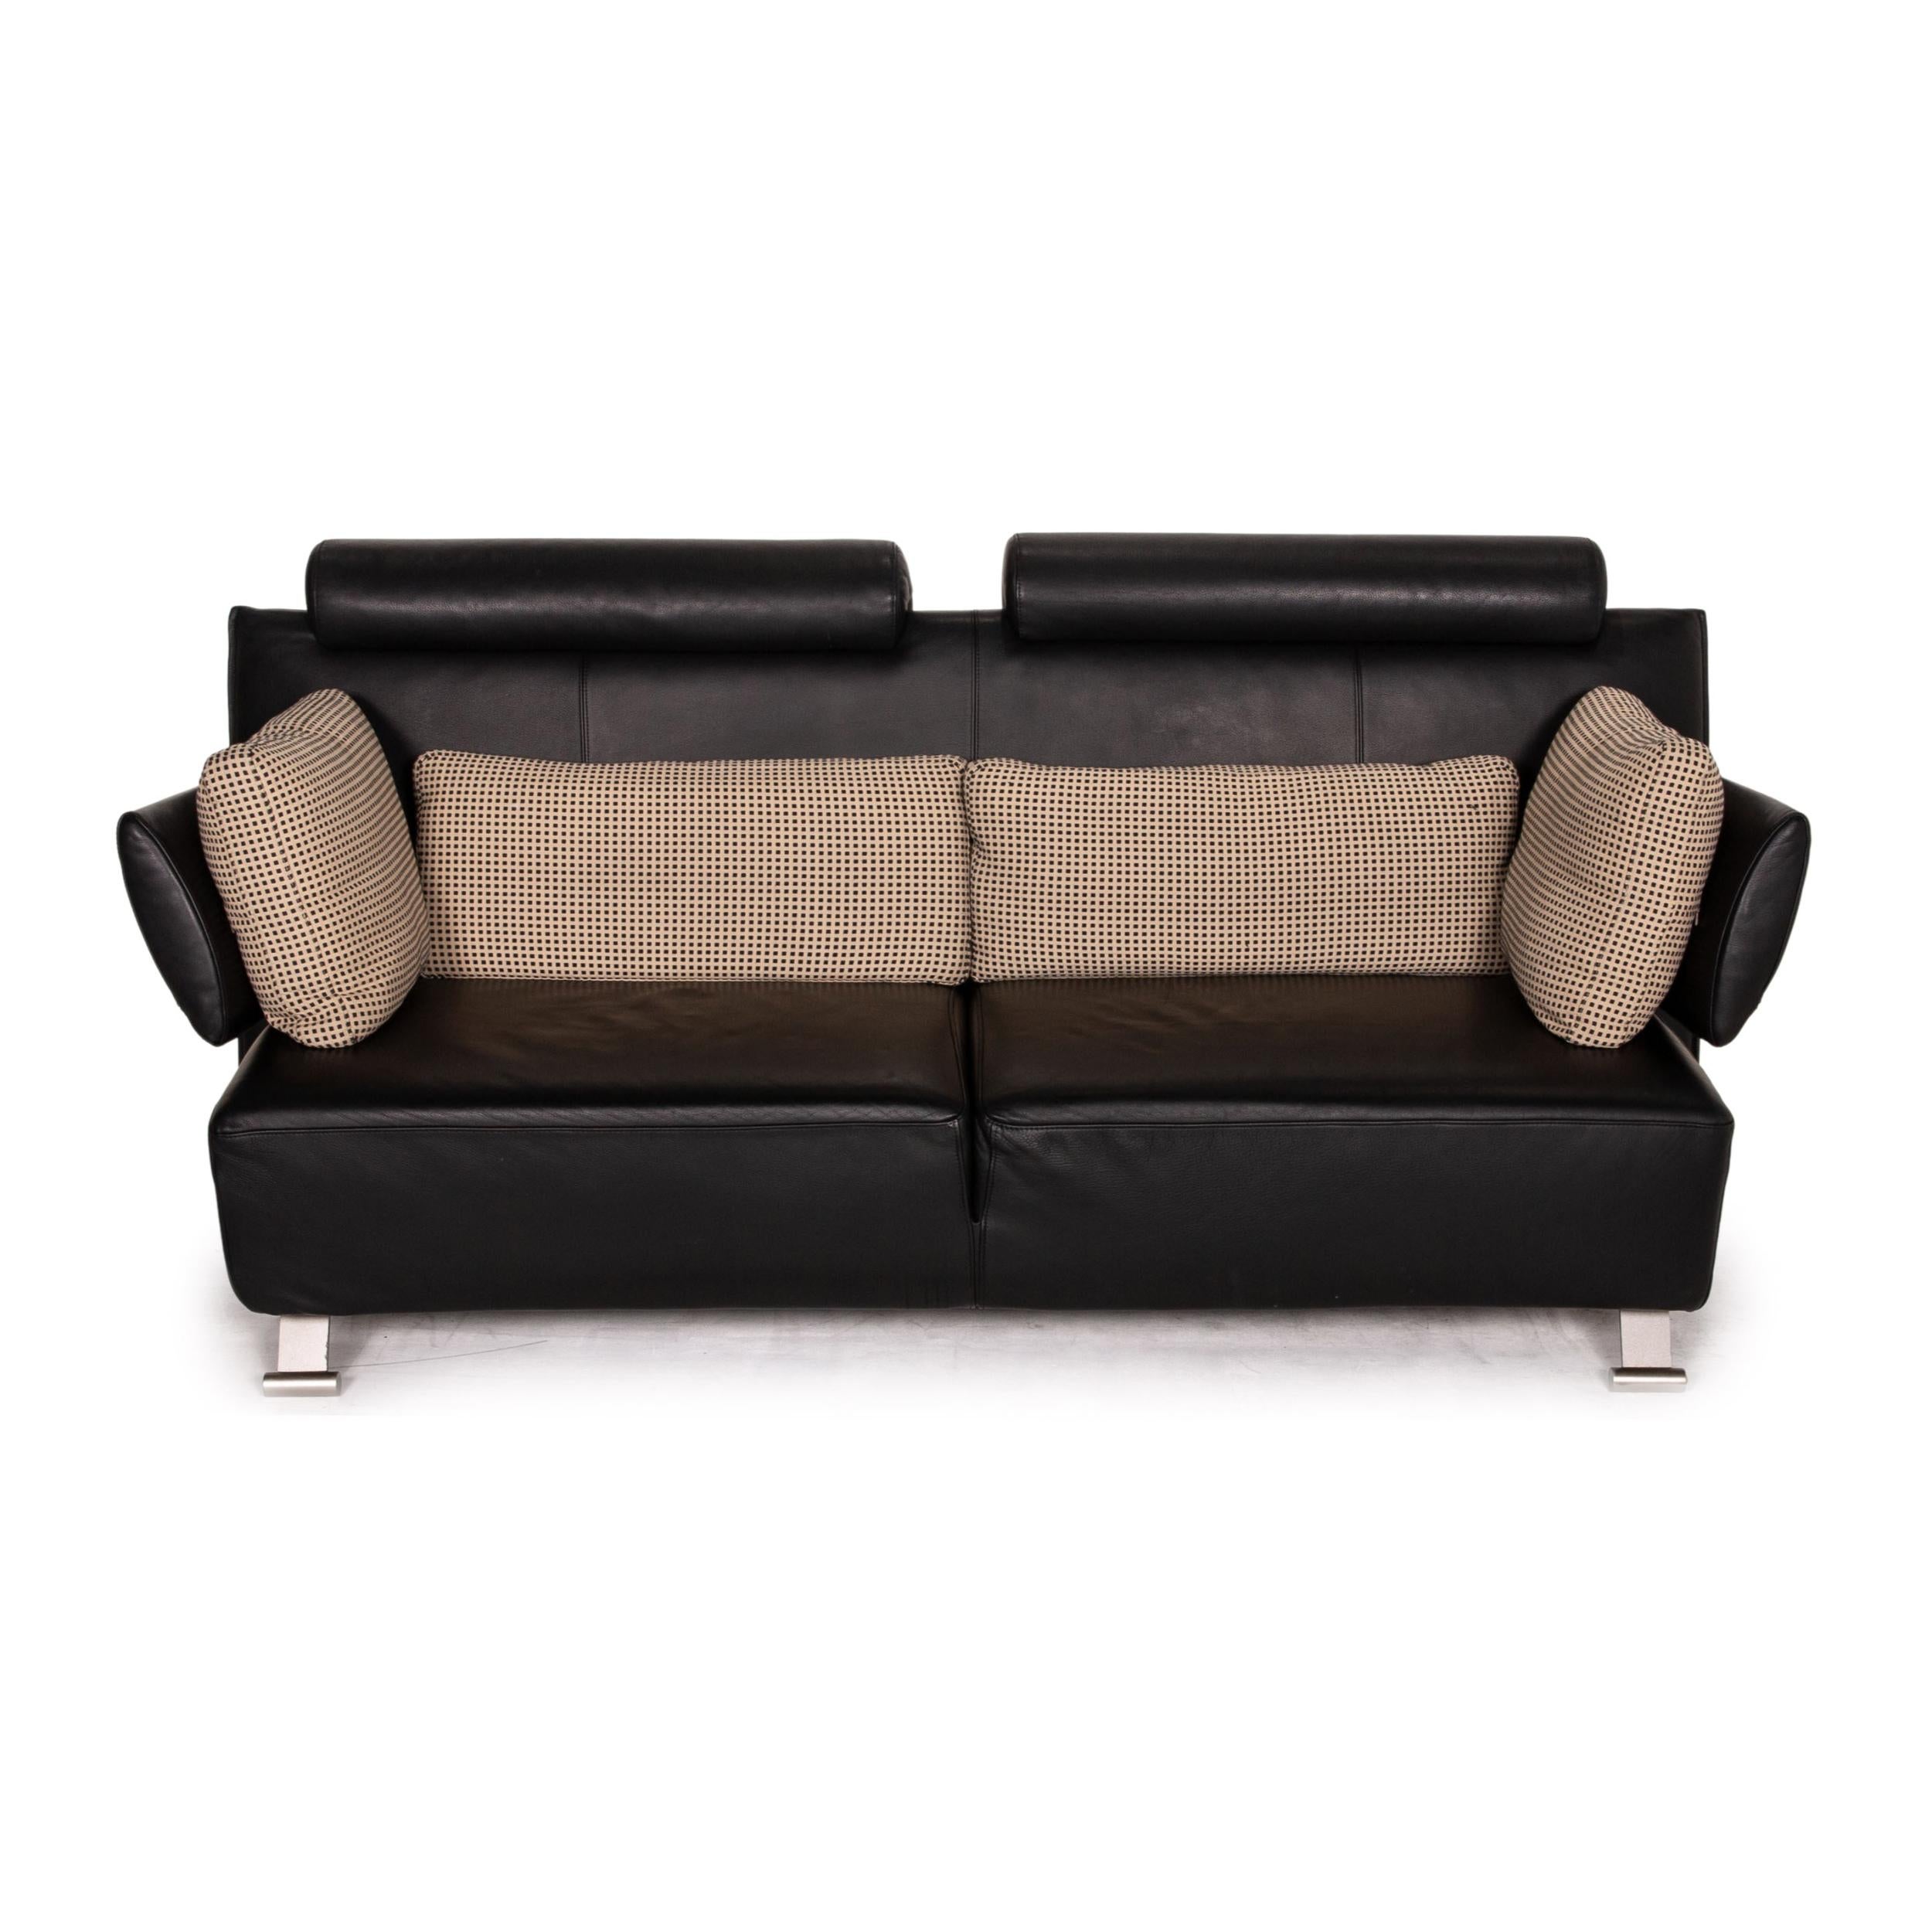 COR Sera Leather Sofa Black Two-Seater Function Couch For Sale 2